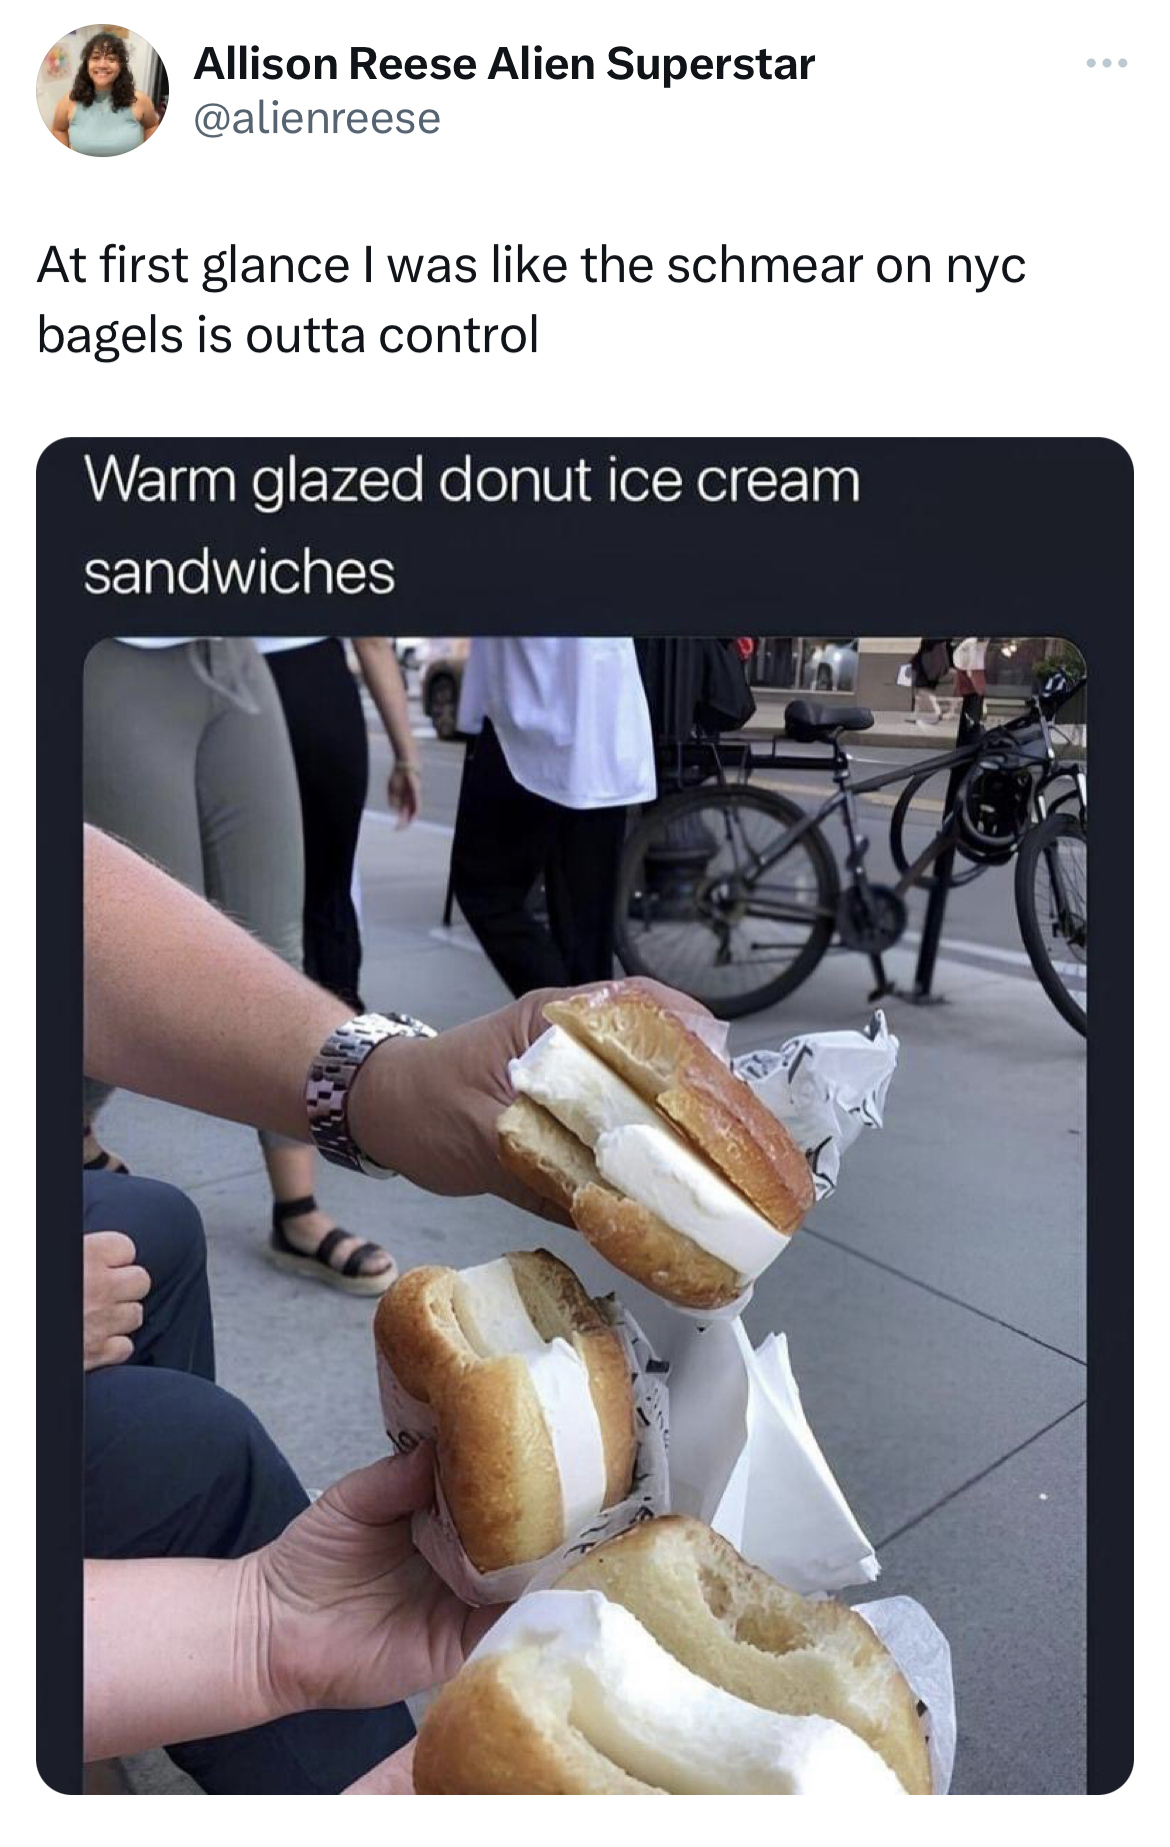 savage and absurd tweets - shoe - Allison Reese Alien Superstar At first glance I was the schmear on nyc bagels is outta control Warm glazed donut ice cream sandwiches